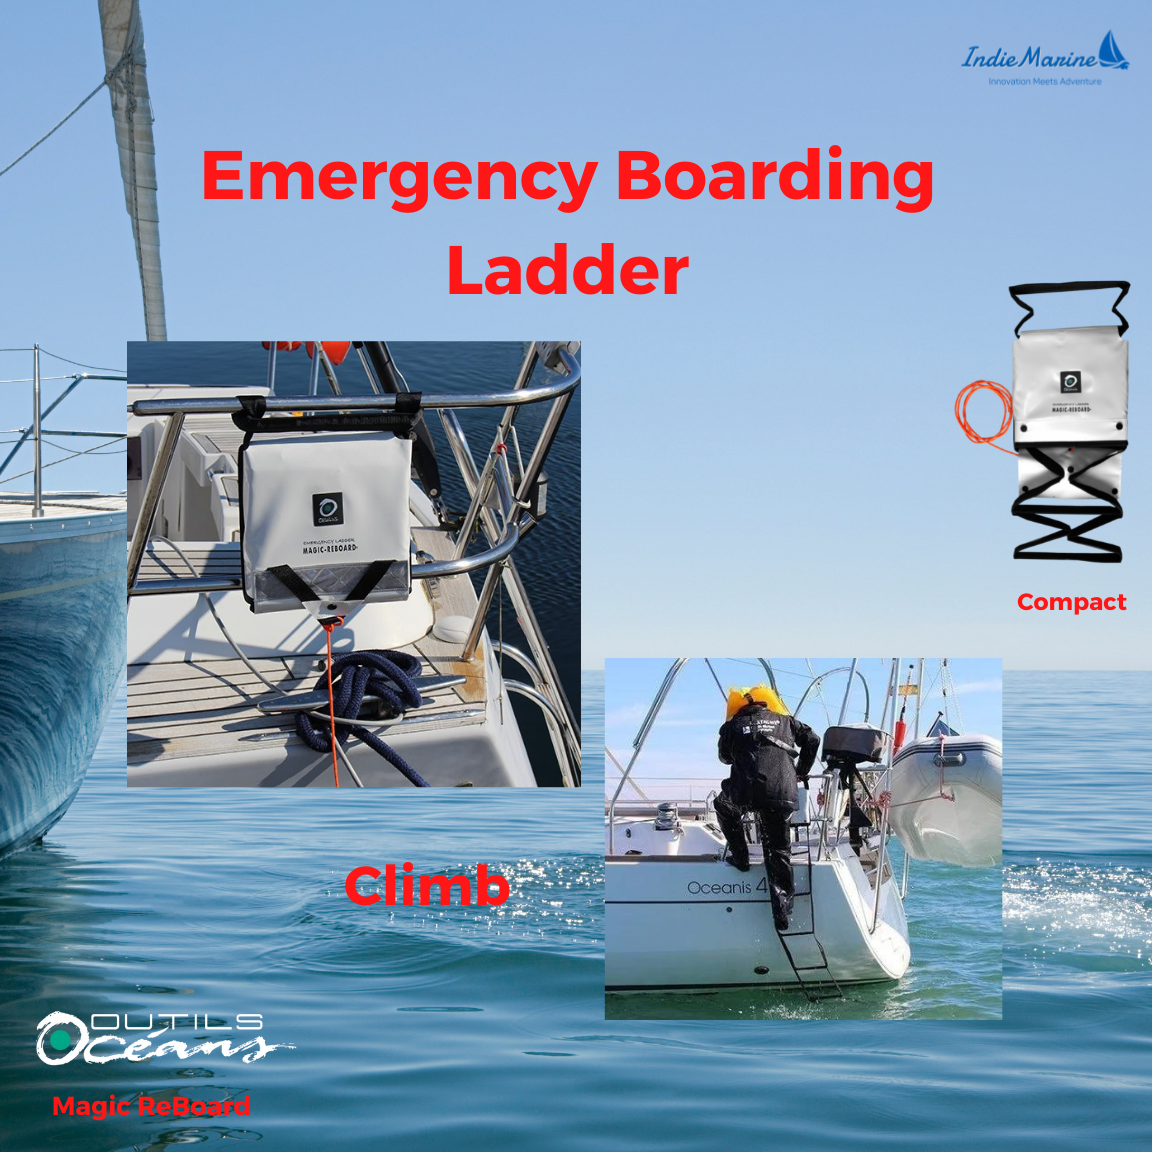 Emergency Ladder - Magic Reboard for Dinghy or Boat - 9 Step- Outils Oceans